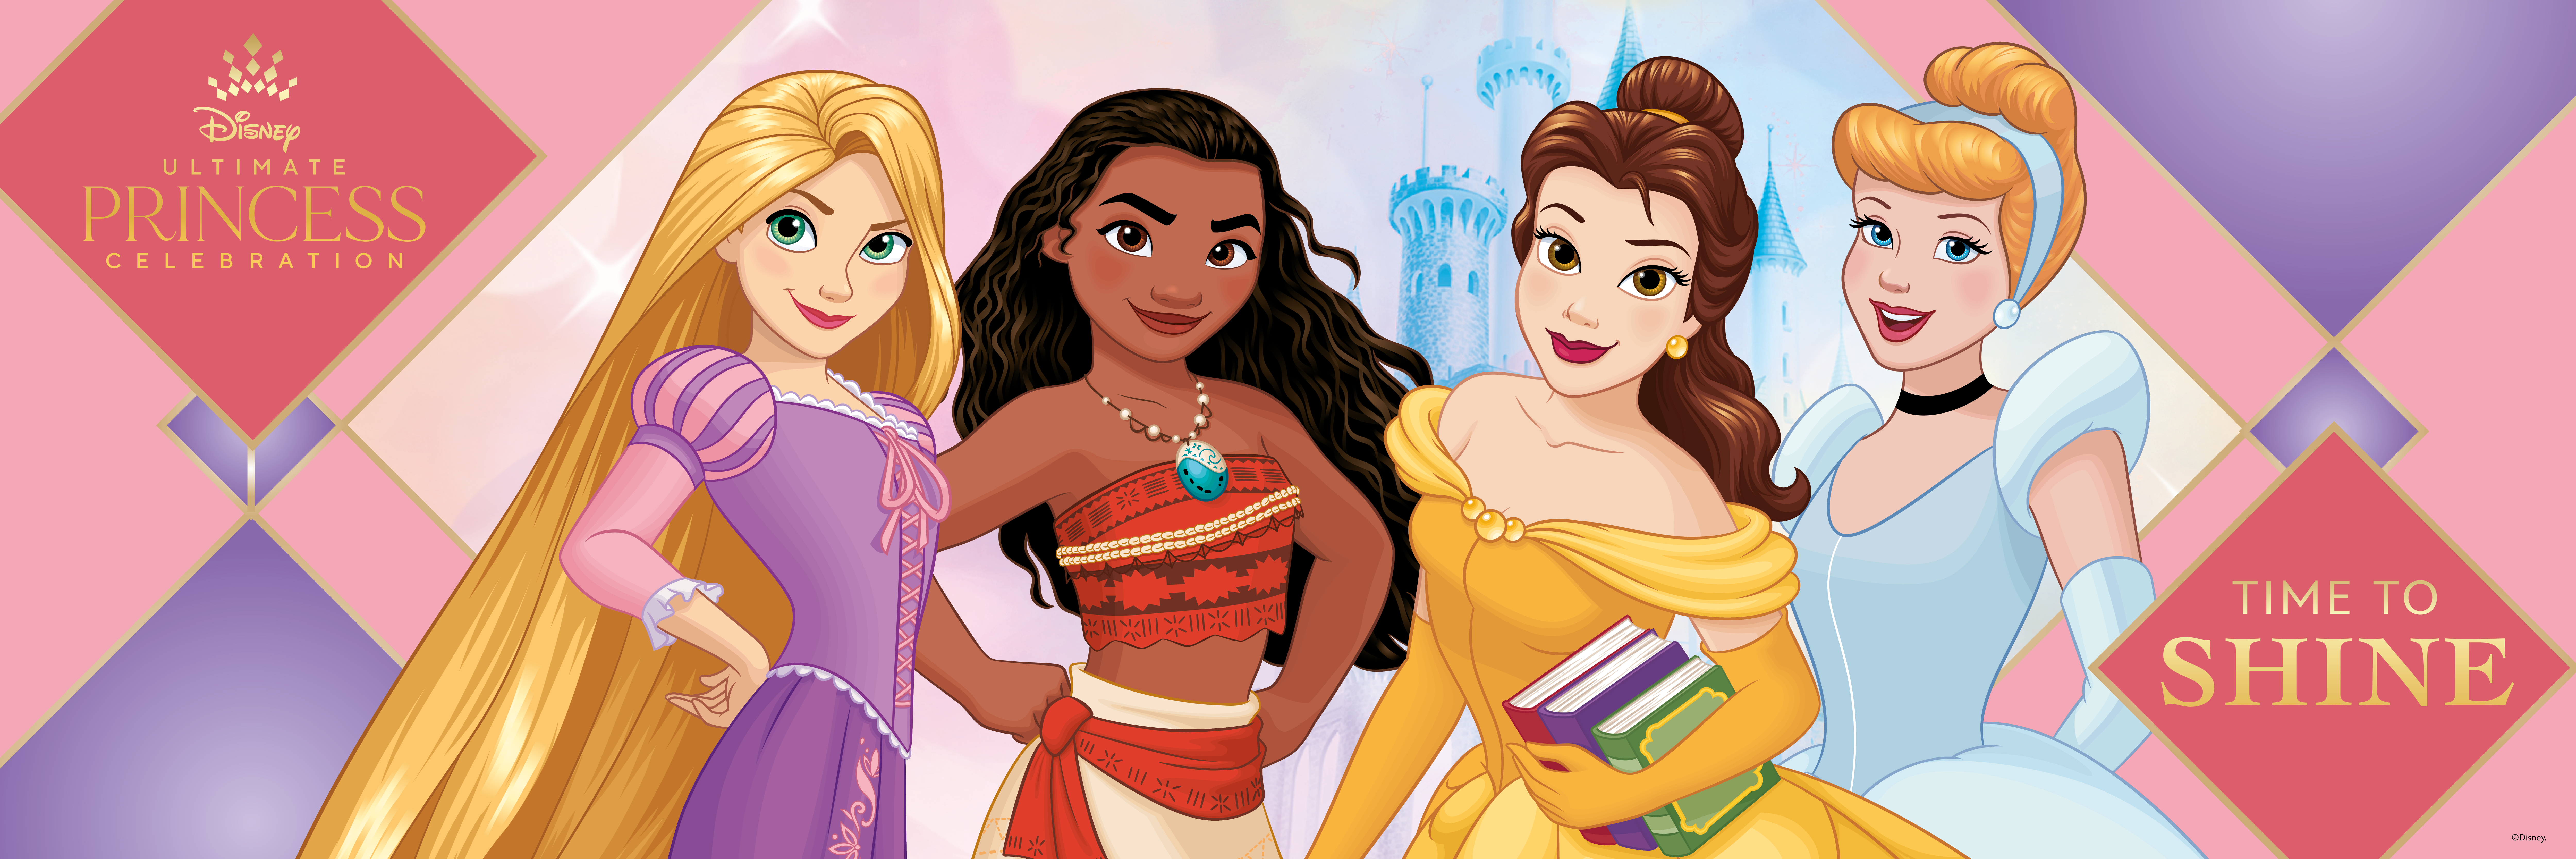 This is the world's most popular Disney princess